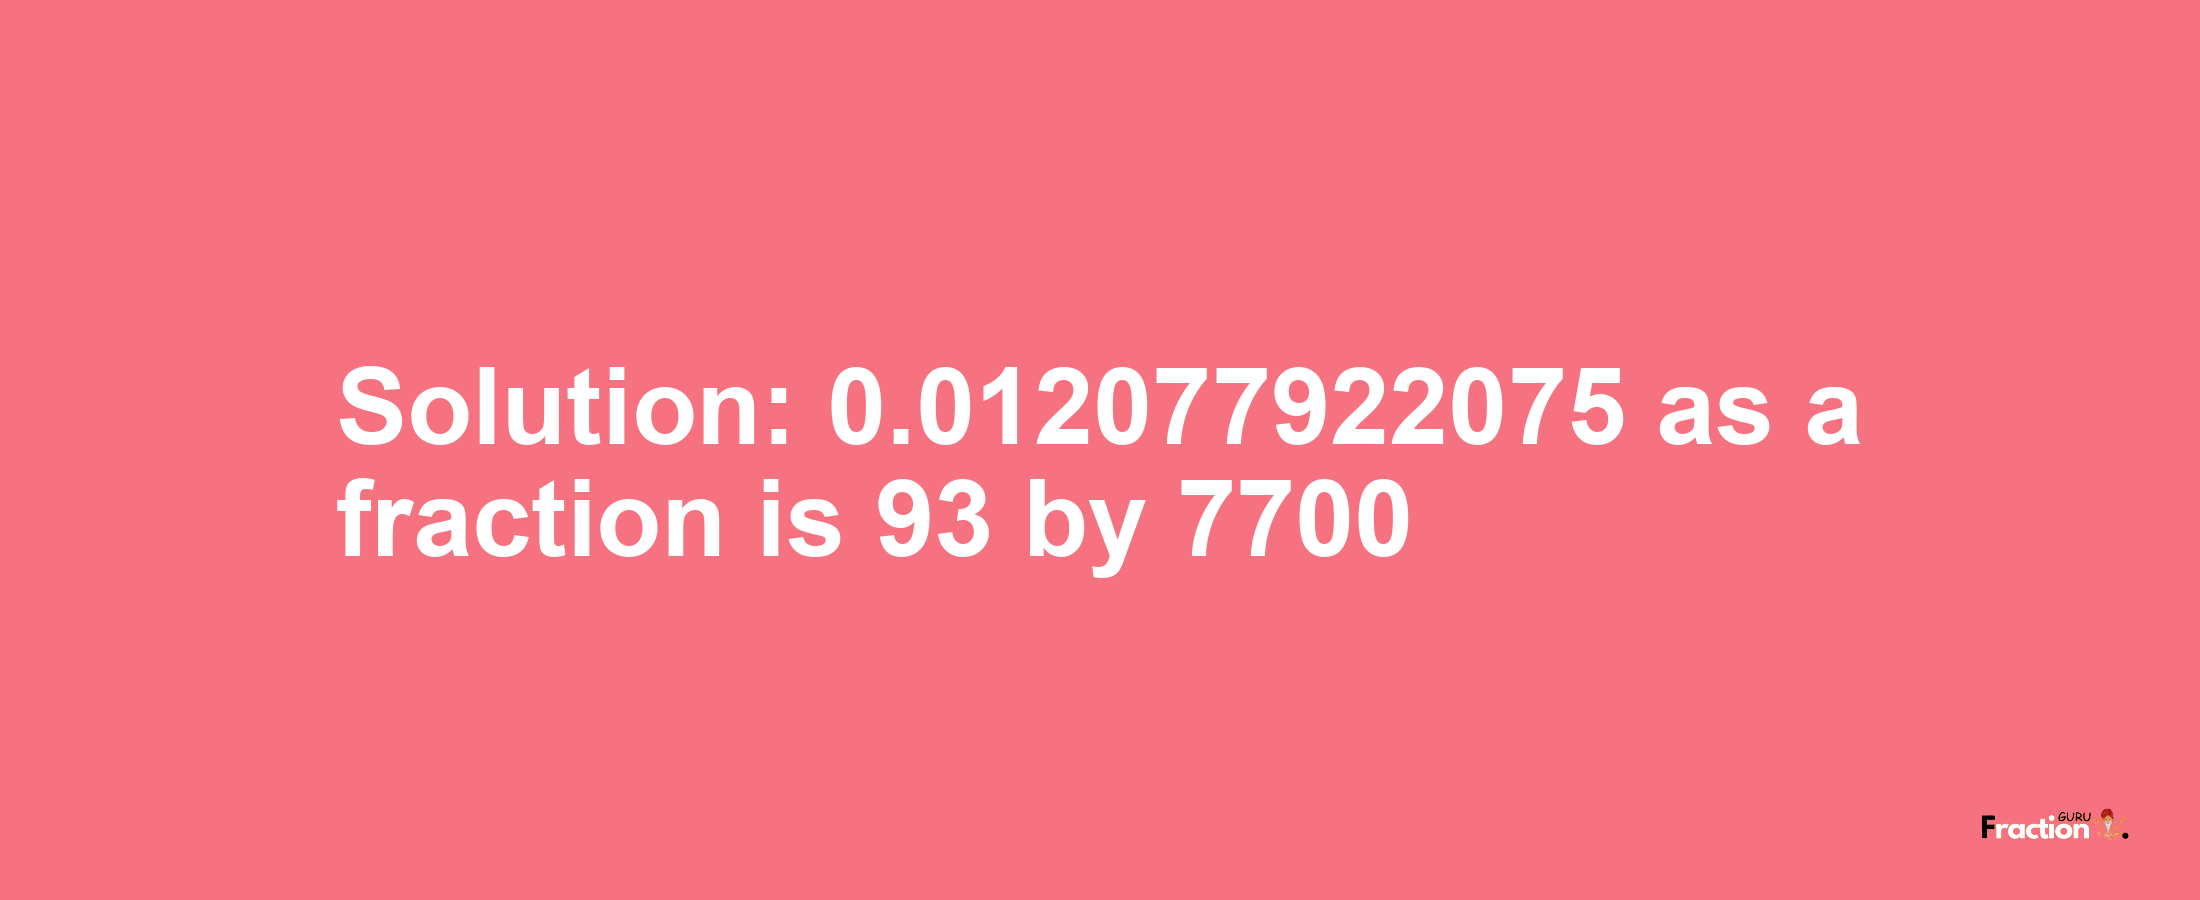 Solution:0.012077922075 as a fraction is 93/7700